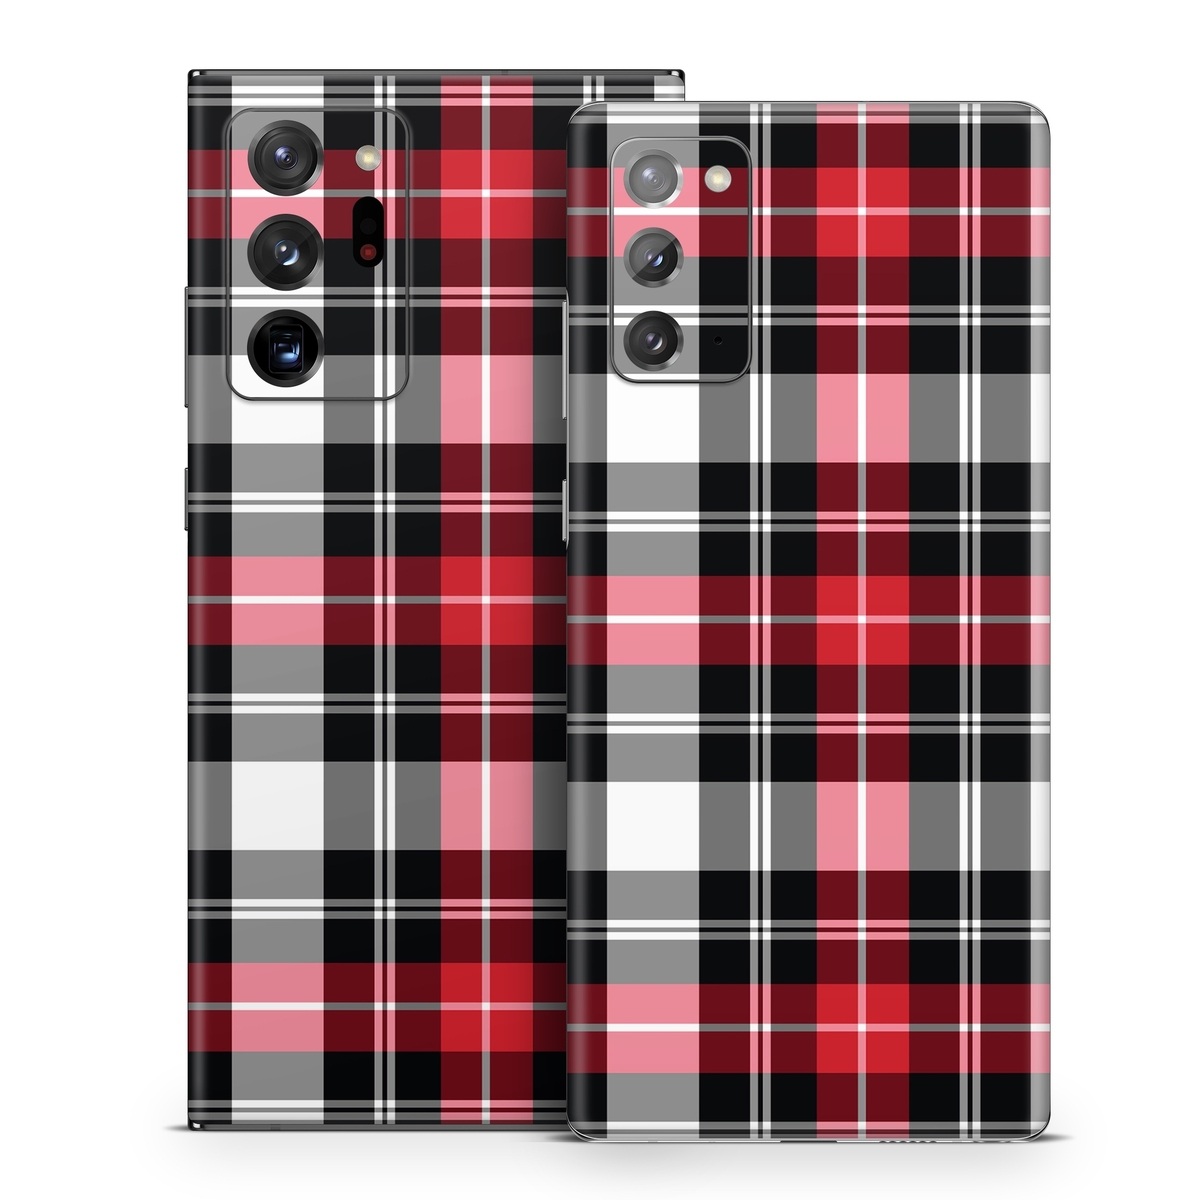 Samsung Galaxy Note 20 Series Skin design of Plaid, Tartan, Pattern, Red, Textile, Design, Line, Pink, Magenta, Square, with black, gray, pink, red, white colors